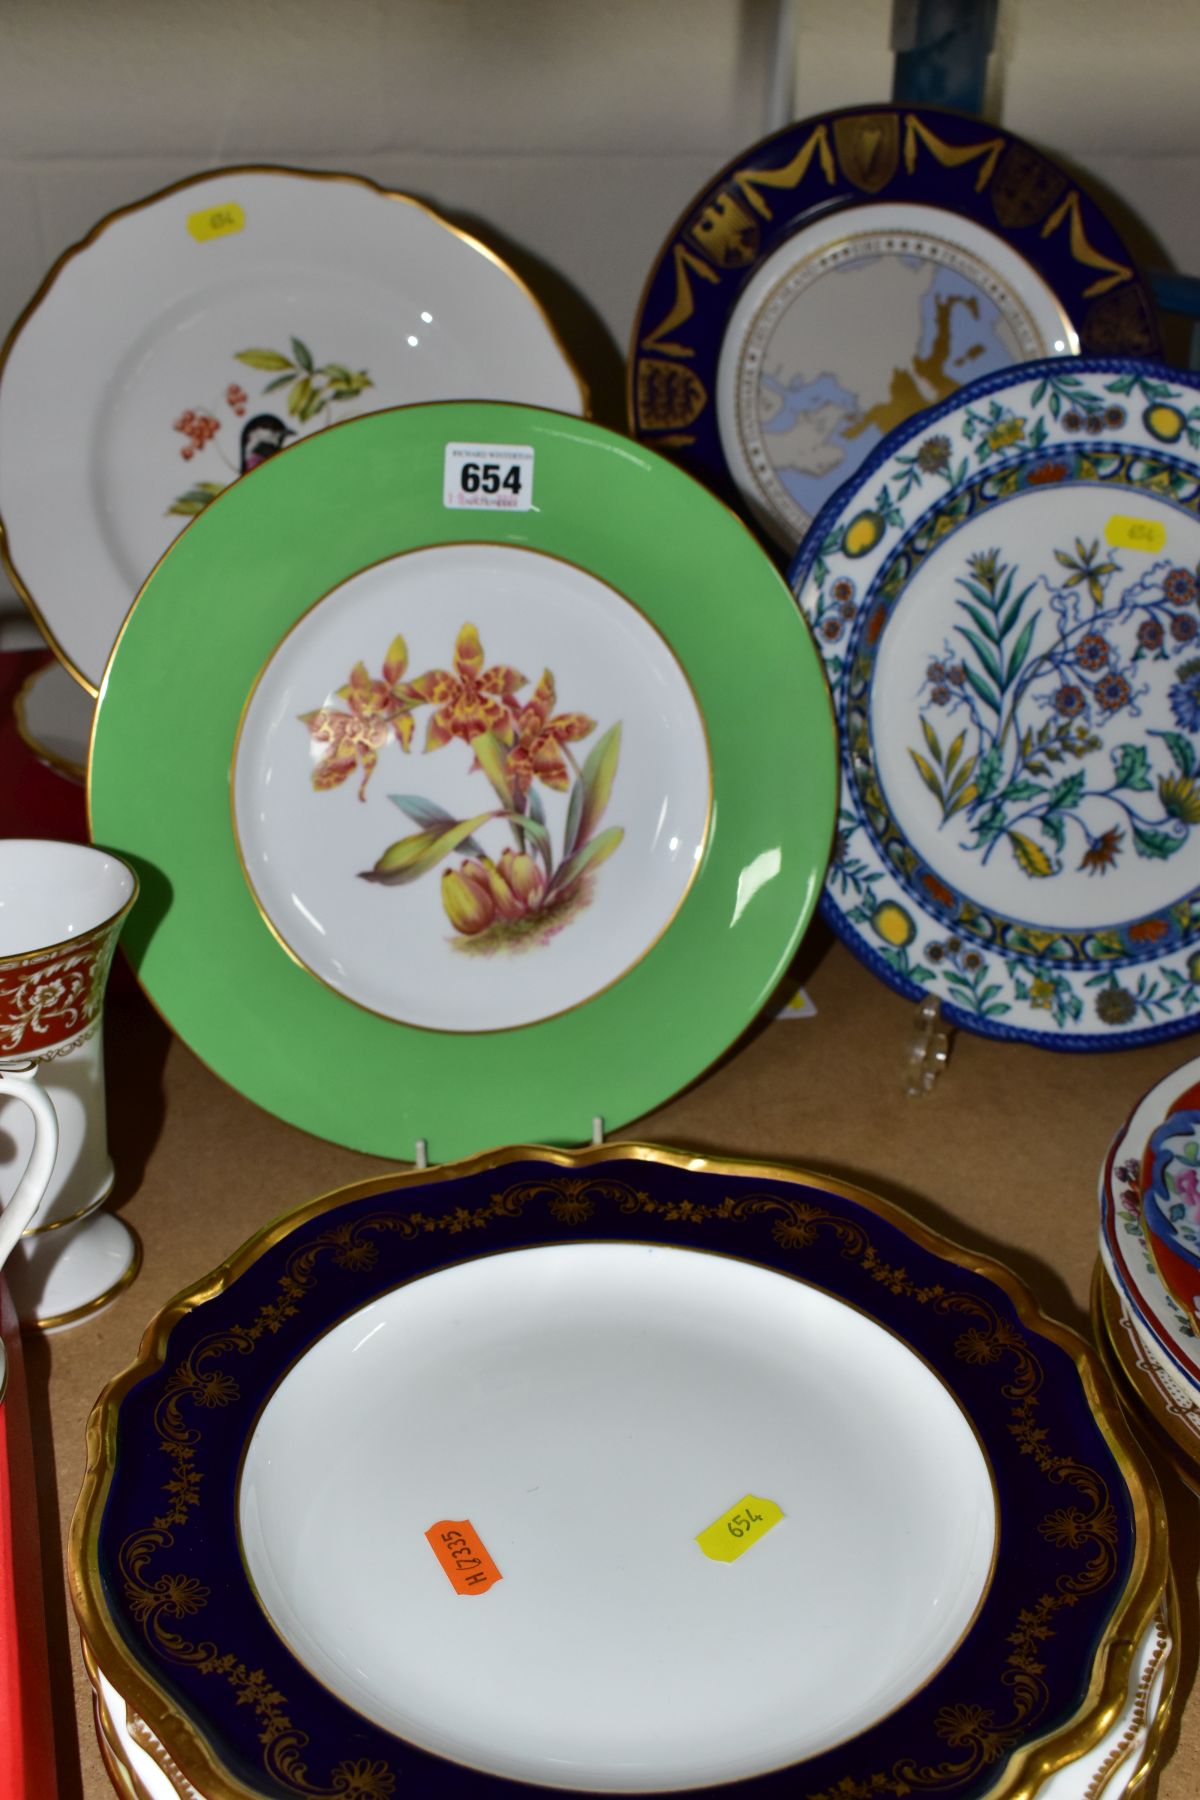 A QUANTITY OF SPODE AND COPELAND PLATES, MUGS, VASES, etc, including commemorative and Royal - Image 4 of 6